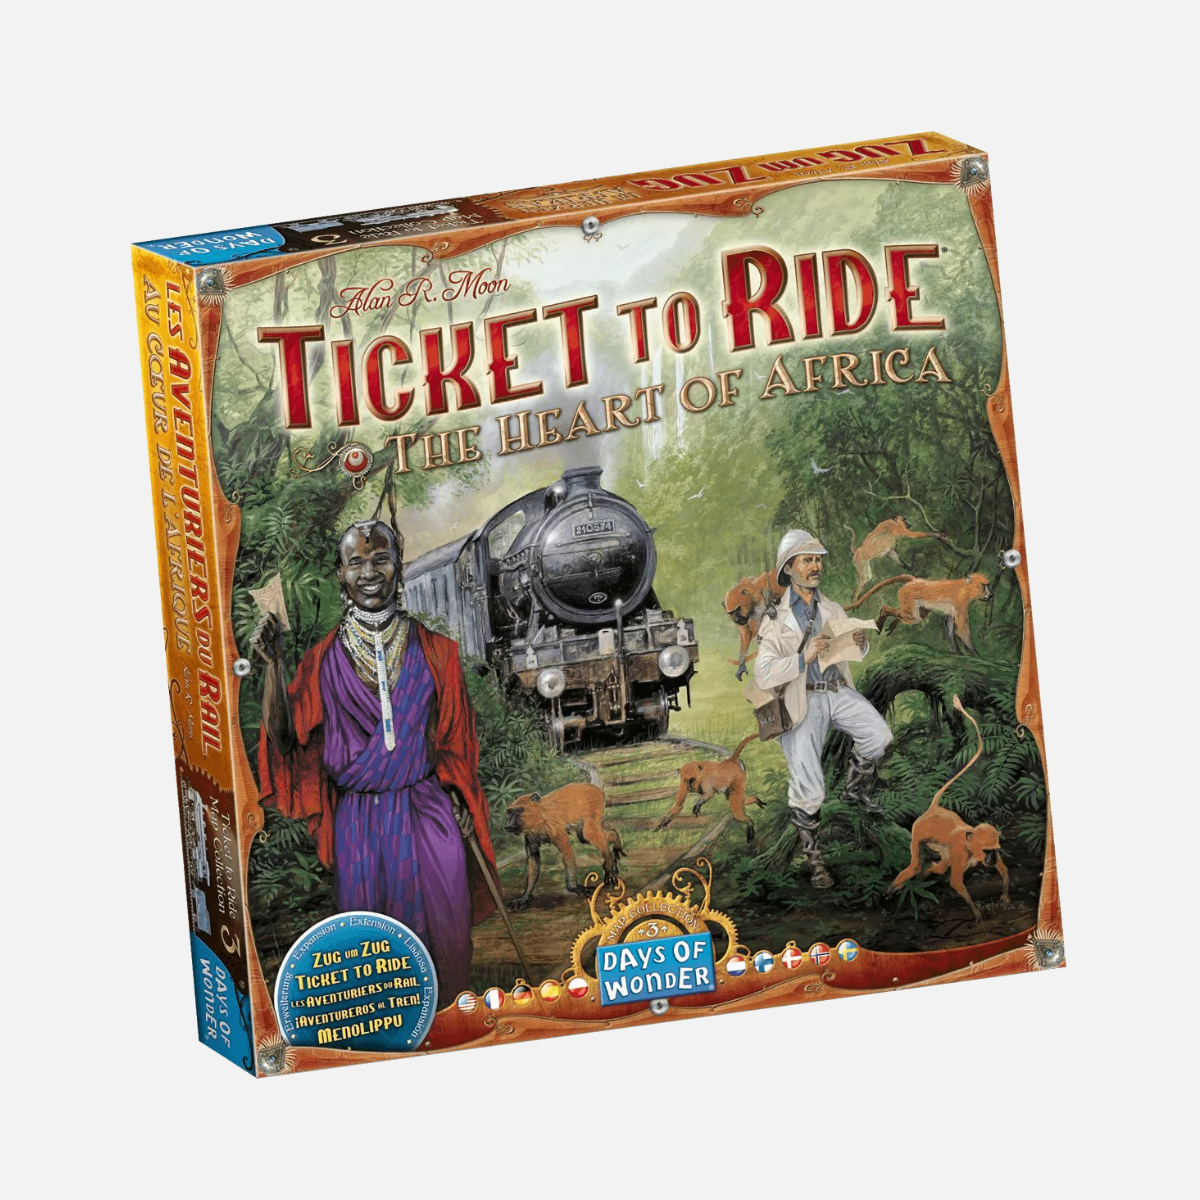 Ticket to Ride The Heart of Africa Board Game